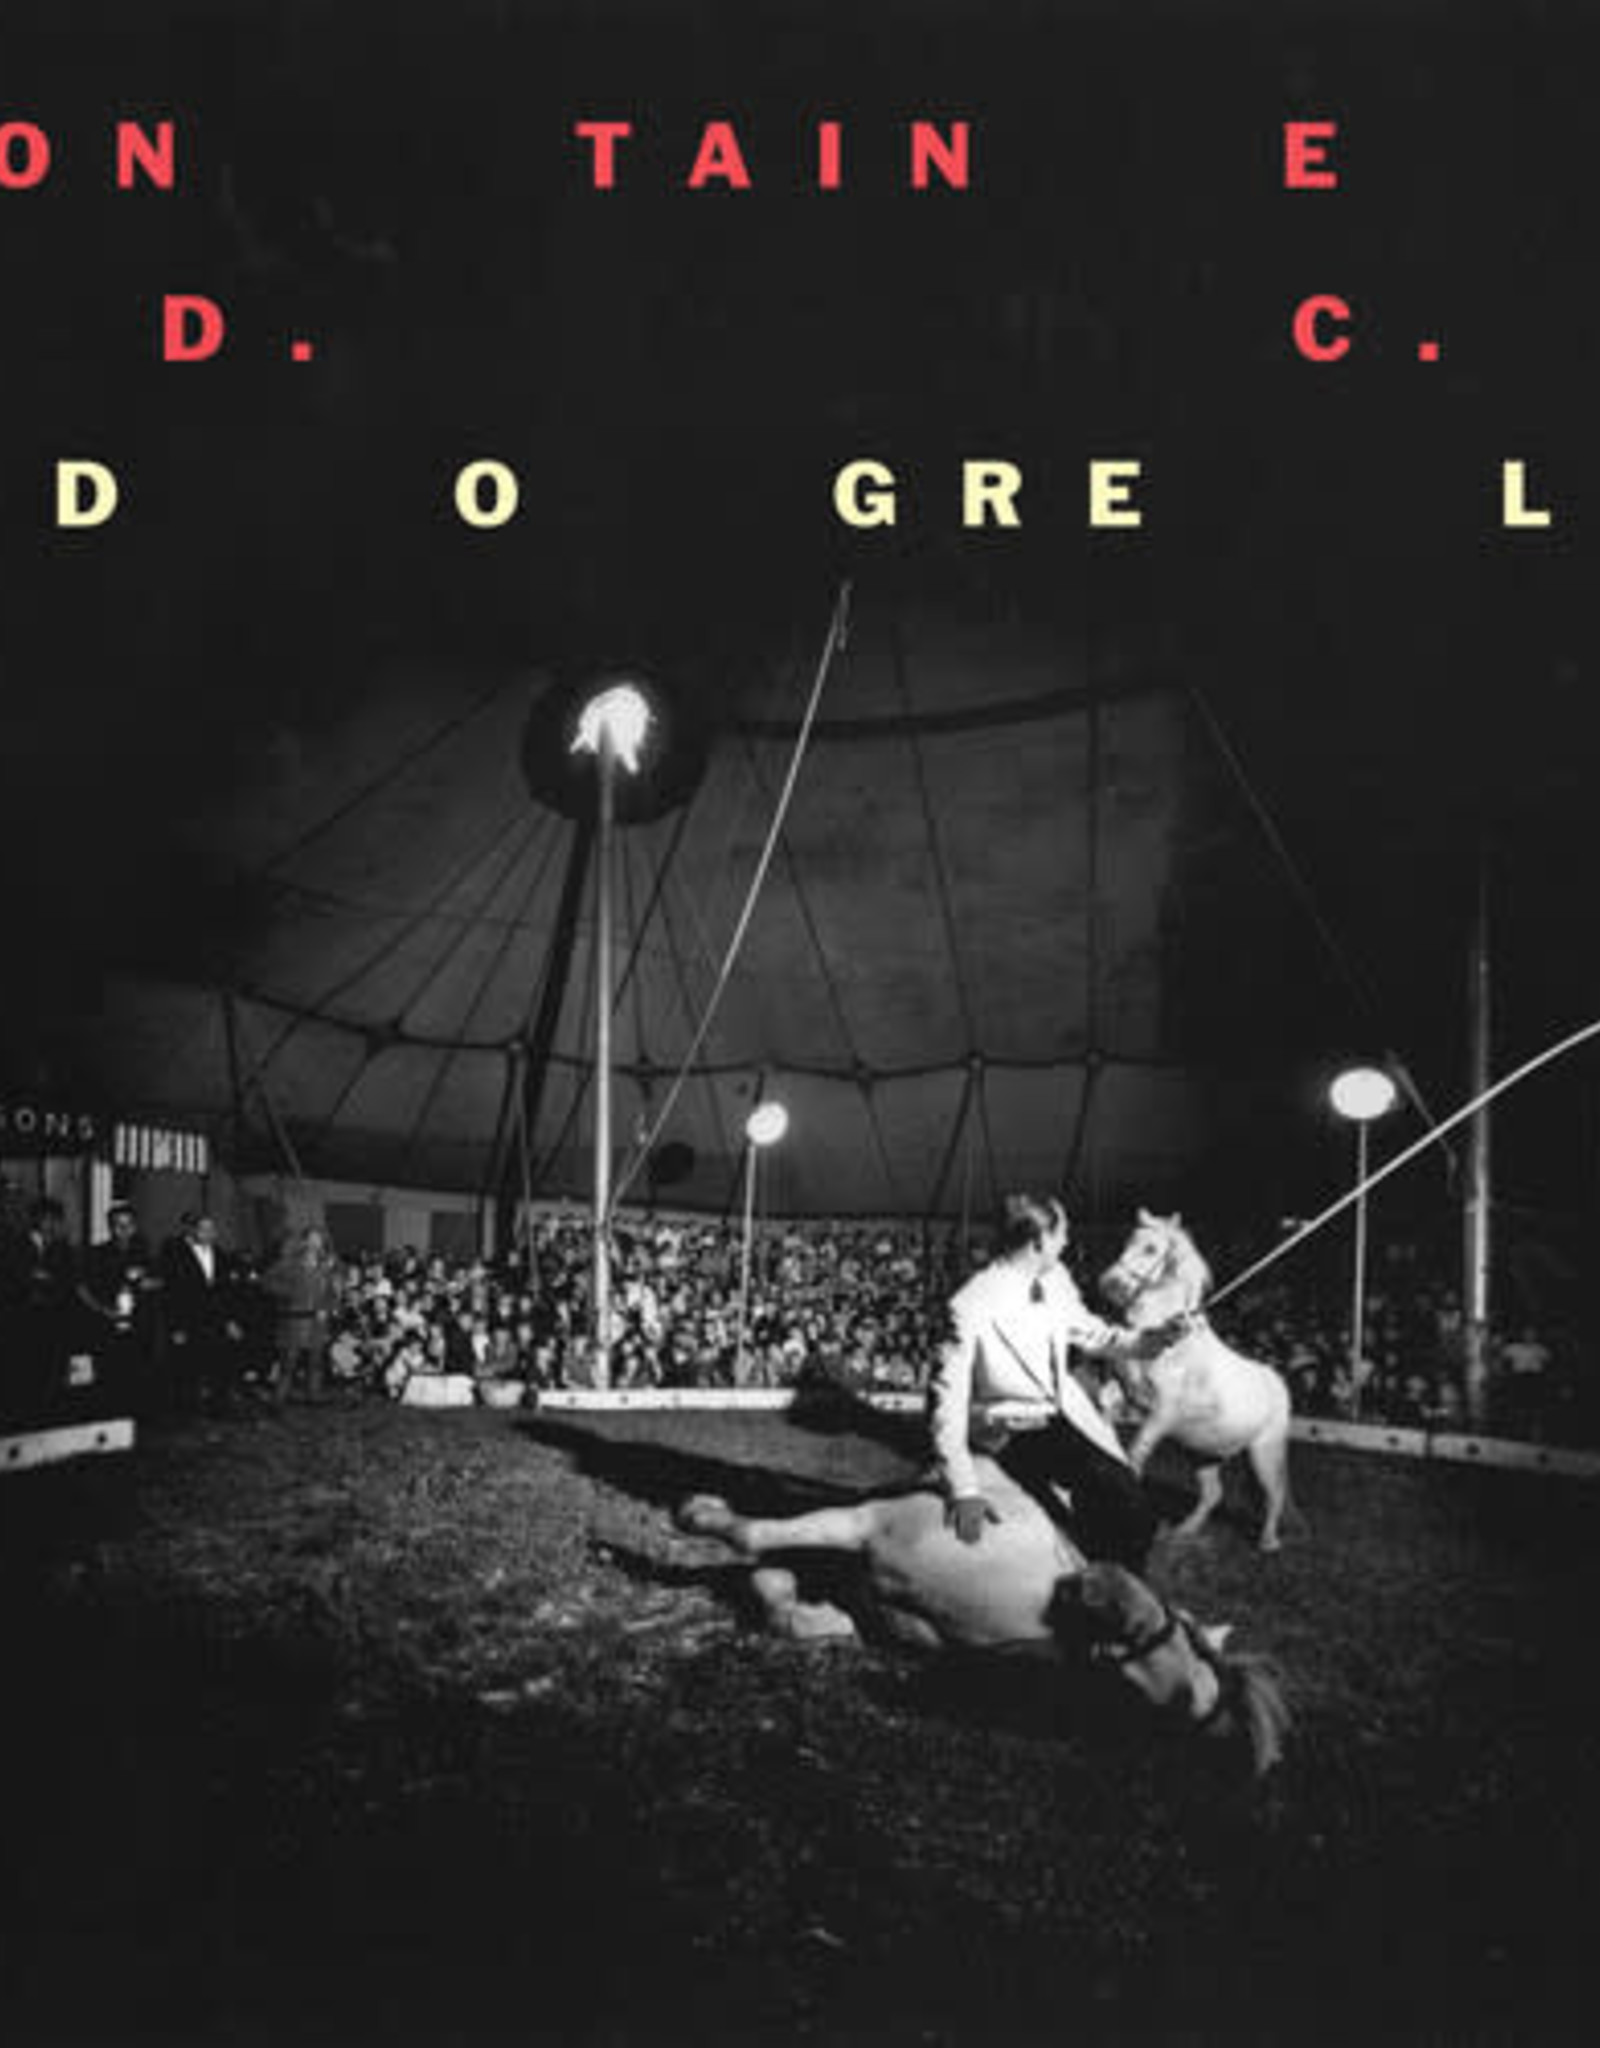 Fontaines Dc - Dogrel